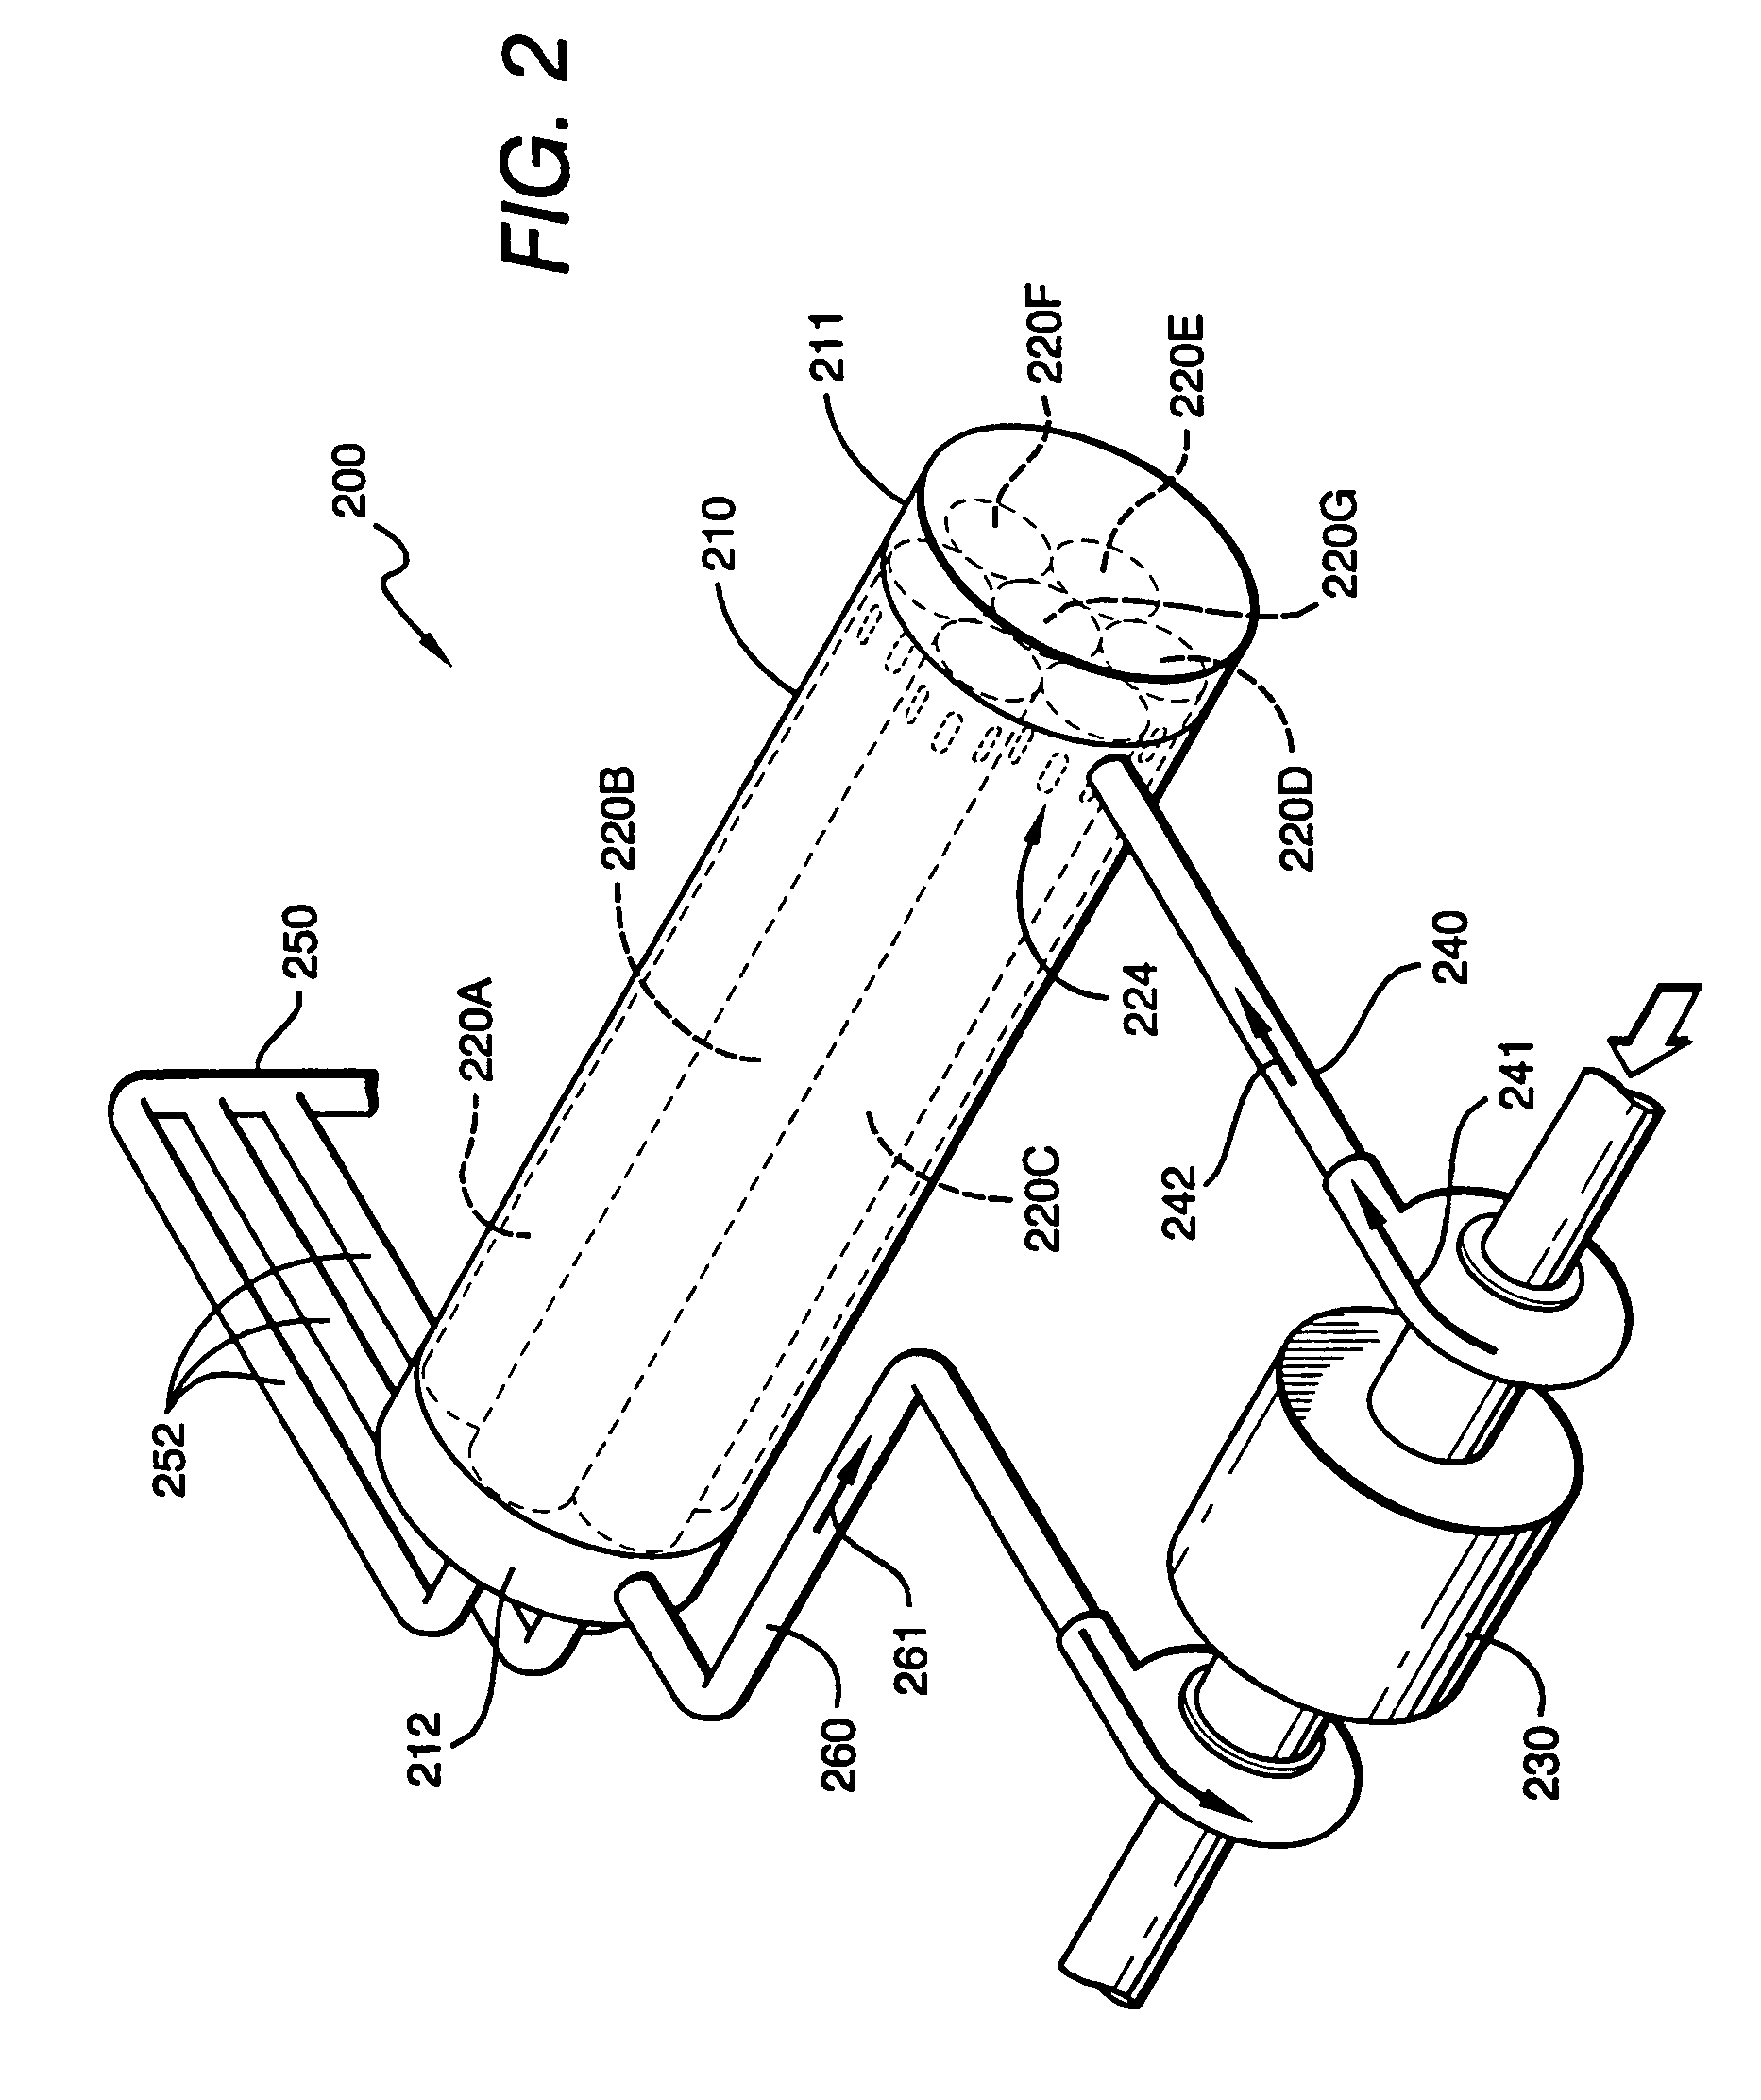 Filtration using pressure vessel with multiple filtration channels